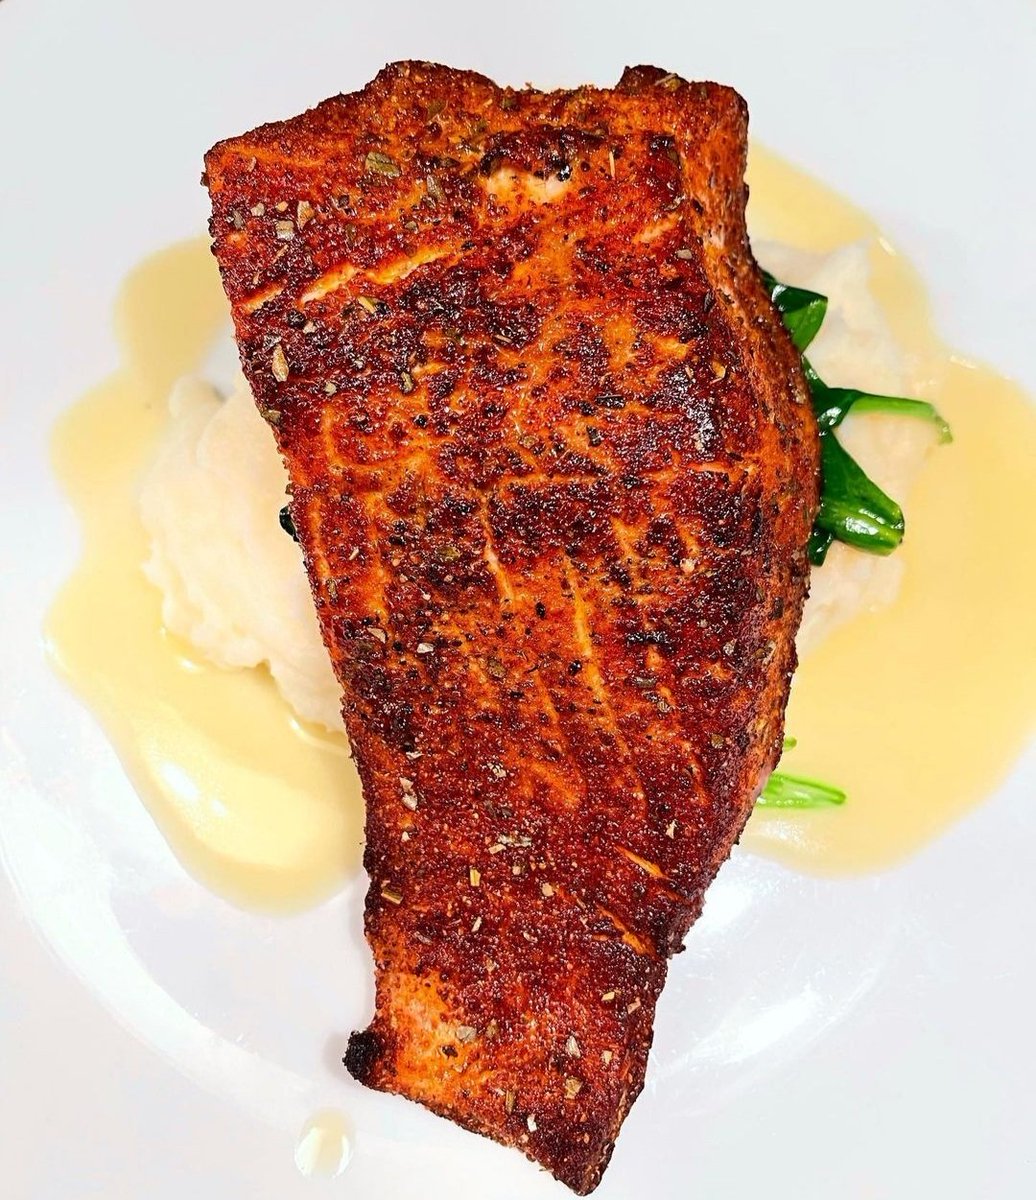 Head to @ClydeFraziersWD this weekend for dinner and order my favorite dish. The Blackened Salmon with Bourban Butter Sauce, Spinach and Garlic Mashed Potatoes. #knicks #NBAPlayoffs